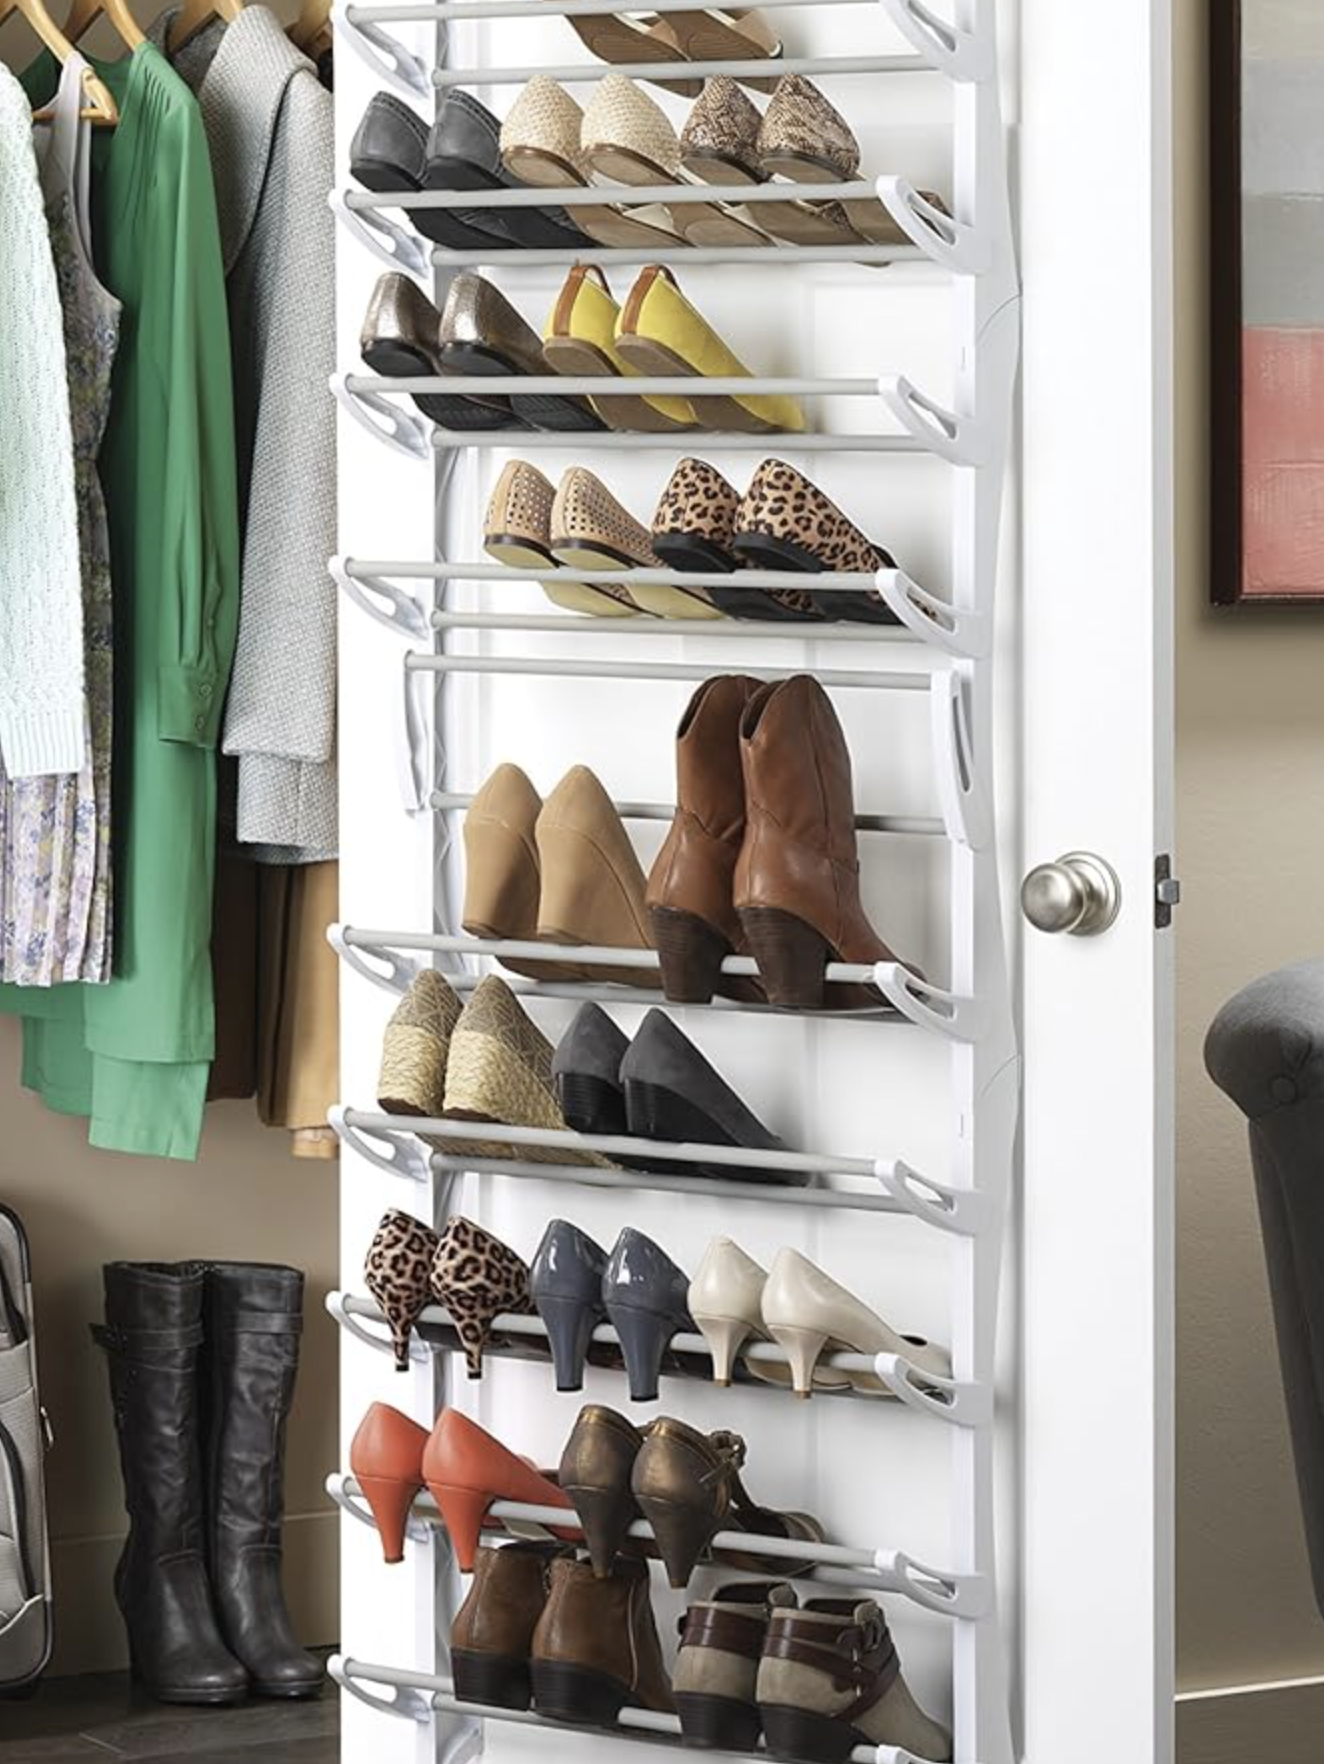 A variety of shoes organized on the rack